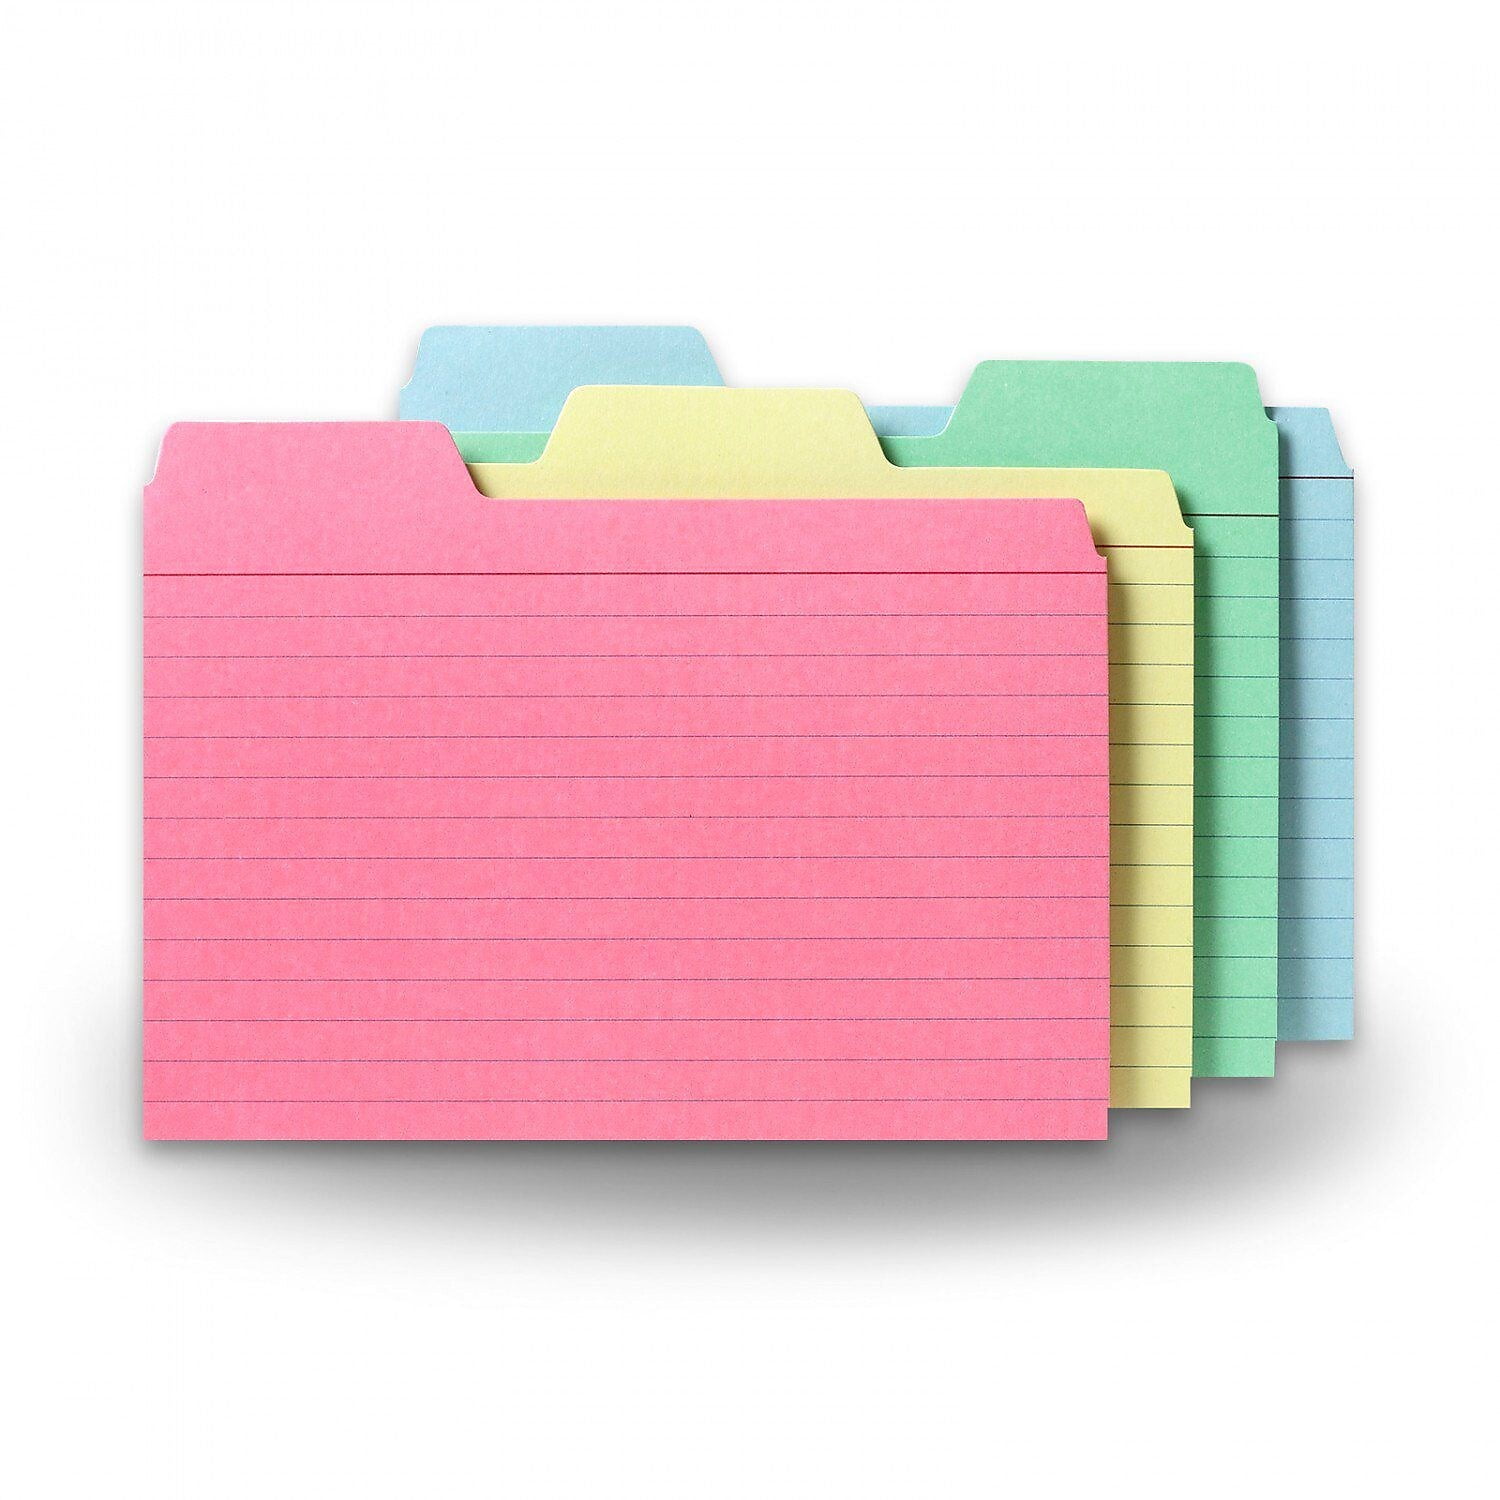 4 x 6 Index Card Sheet Protectors for 4x6 index cards & flash cards